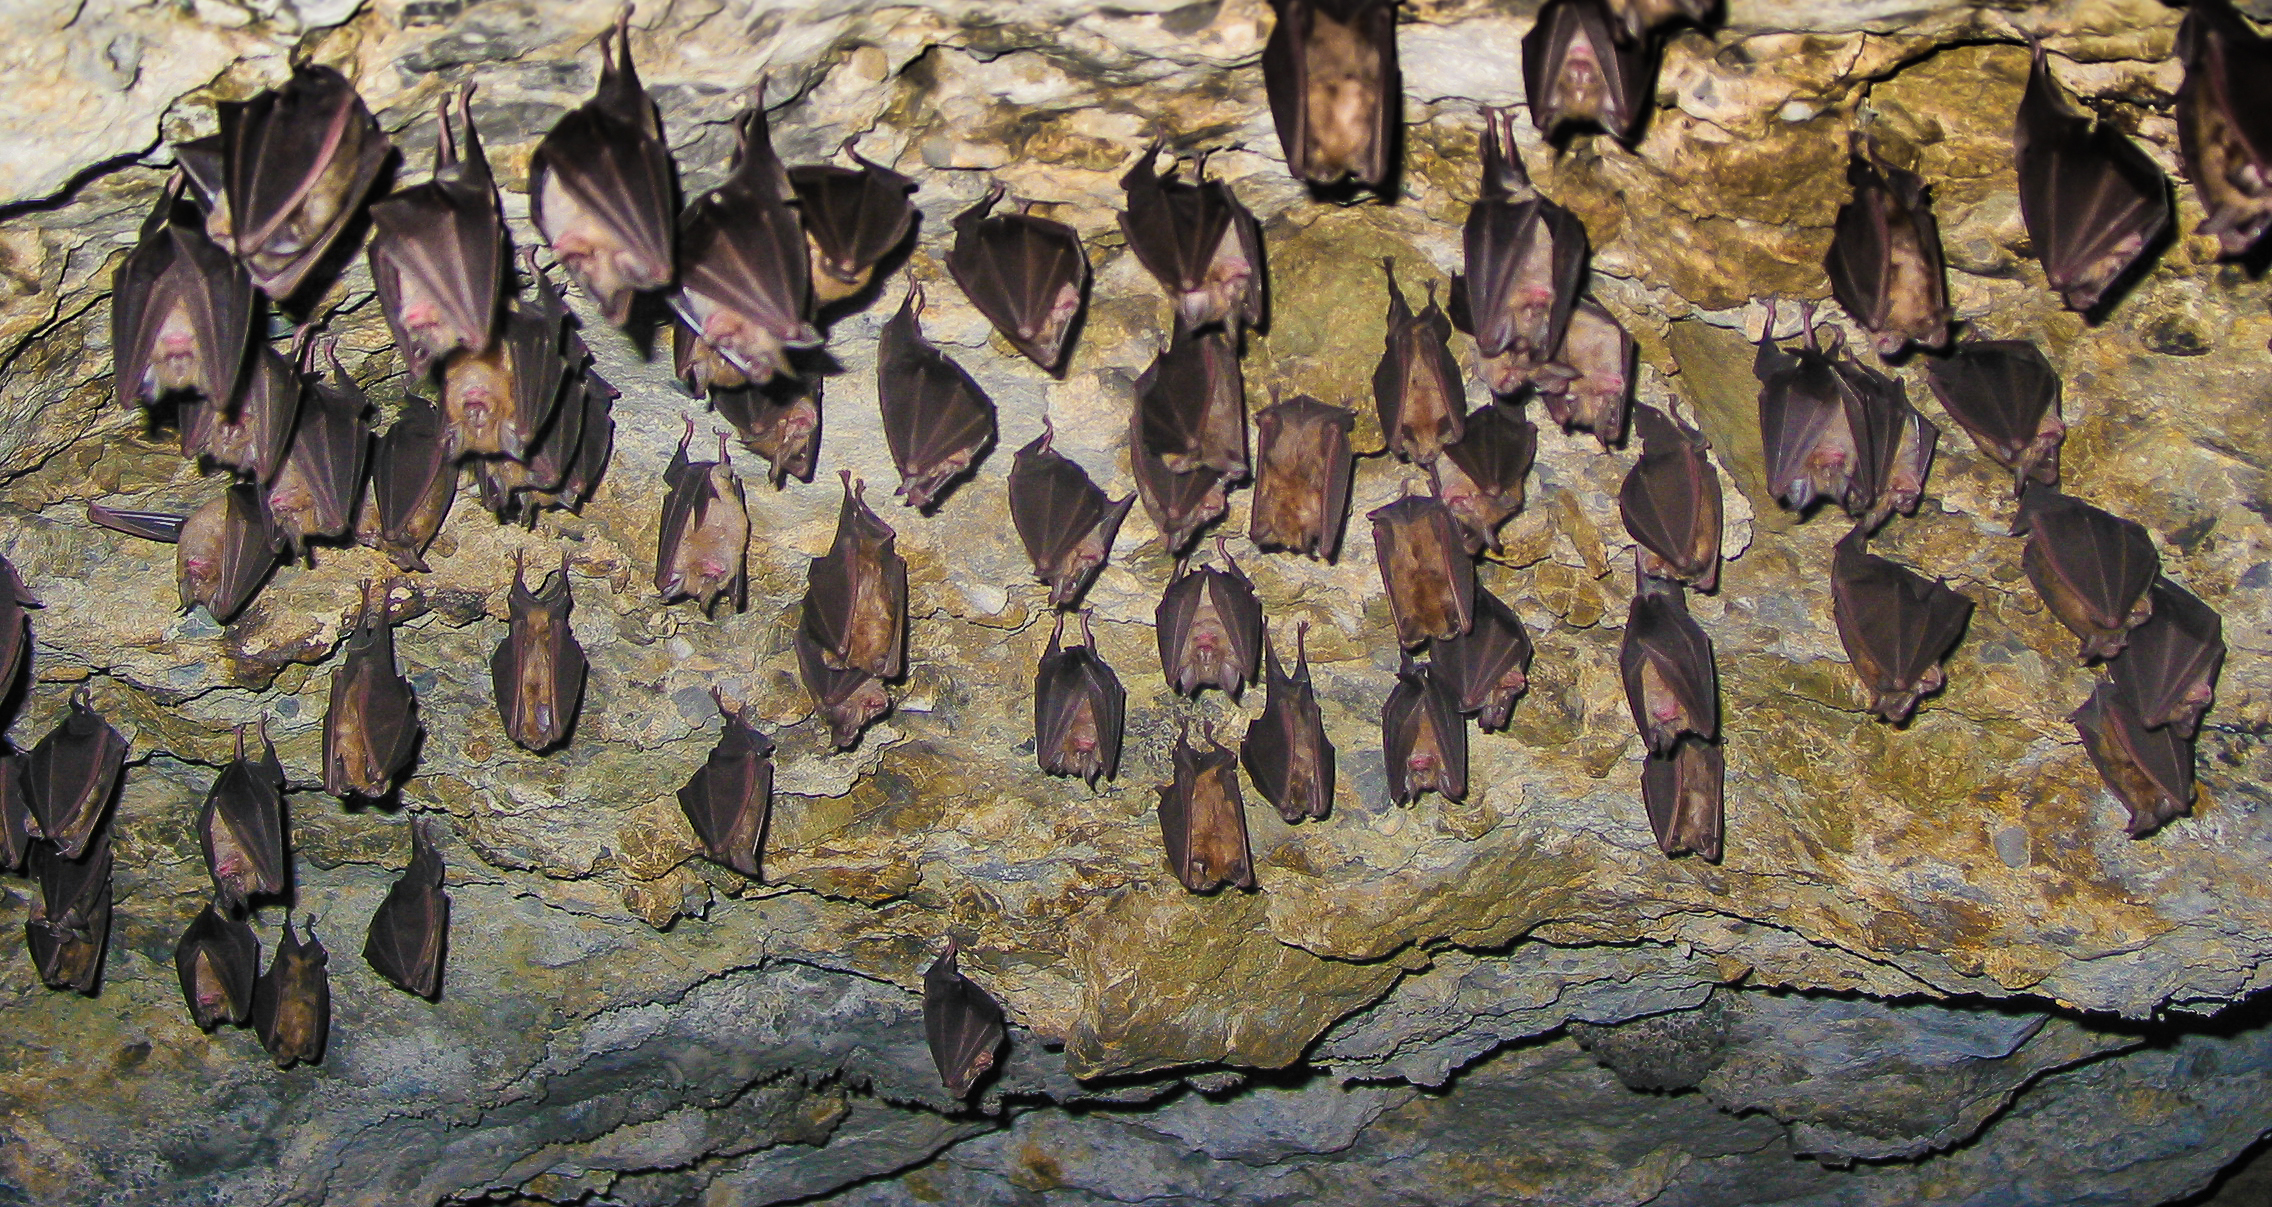 Greek Caves and Bats: Management Actions and Change of Attitude